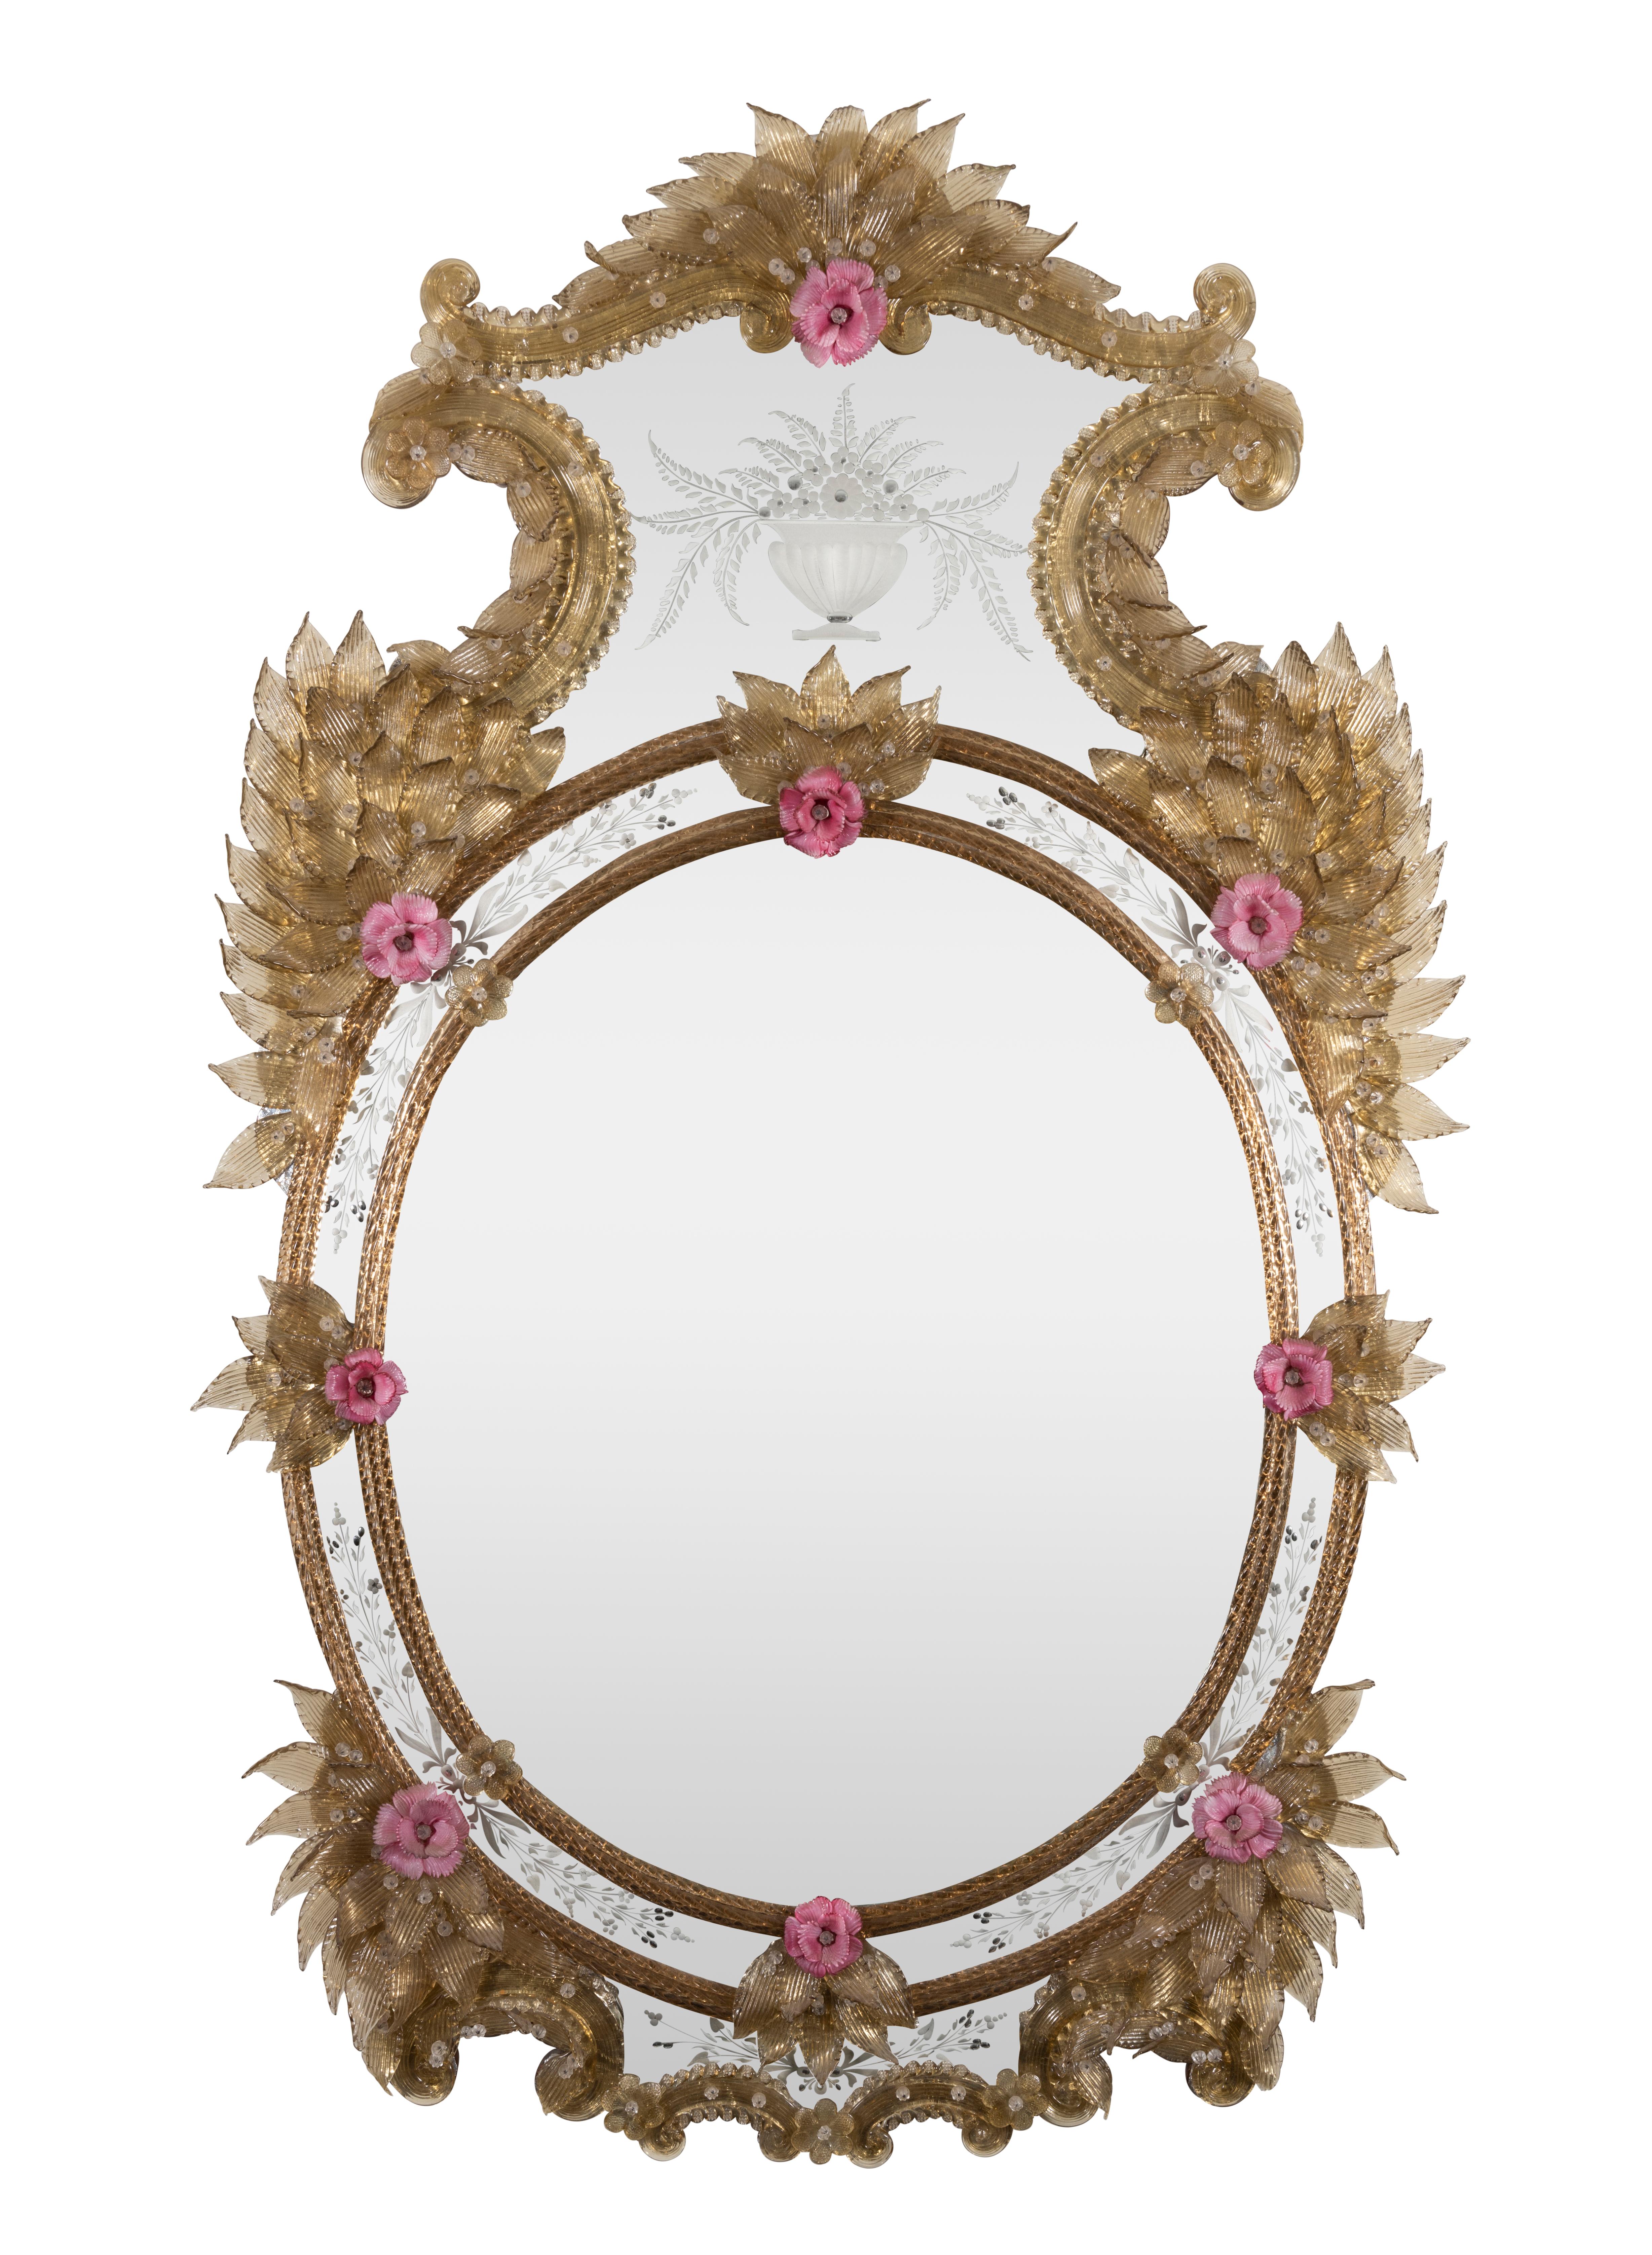 A Late 19th Venetian Oval Gilt-Inlaid, Coloured Glass and Etched Mirror

The high shaped crest framed by opposed C scrolls and S scrolls with overlapping leaves above, the glass centred by a gadrooned vase of foliage and flowers, the shoulders with